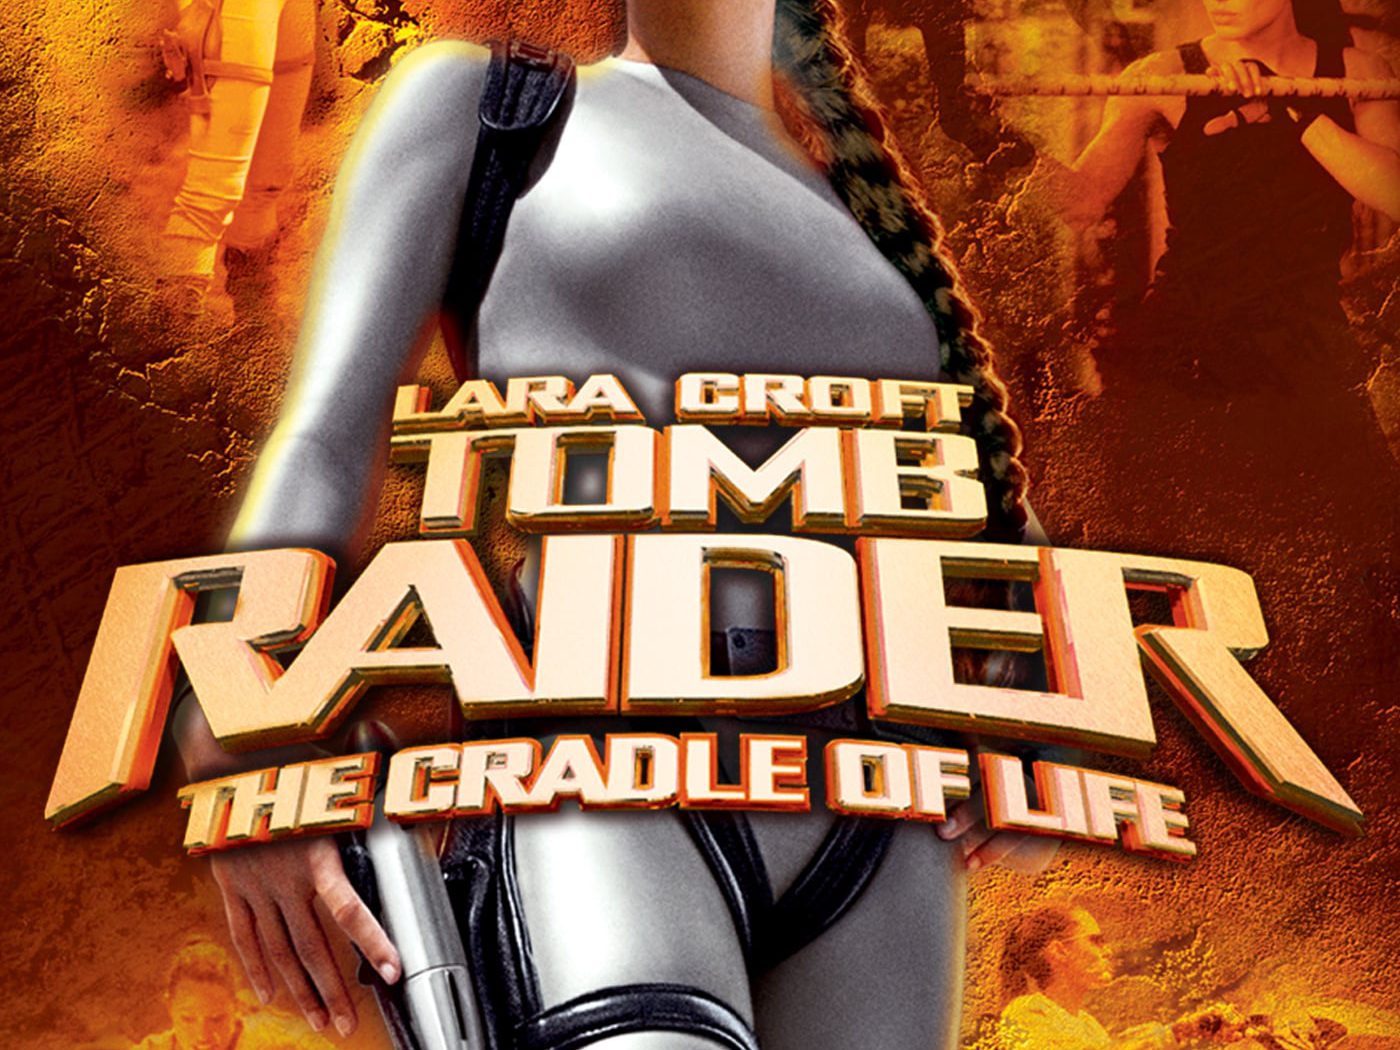 Poster for the movie "Lara Croft: Tomb Raider - The Cradle of Life"